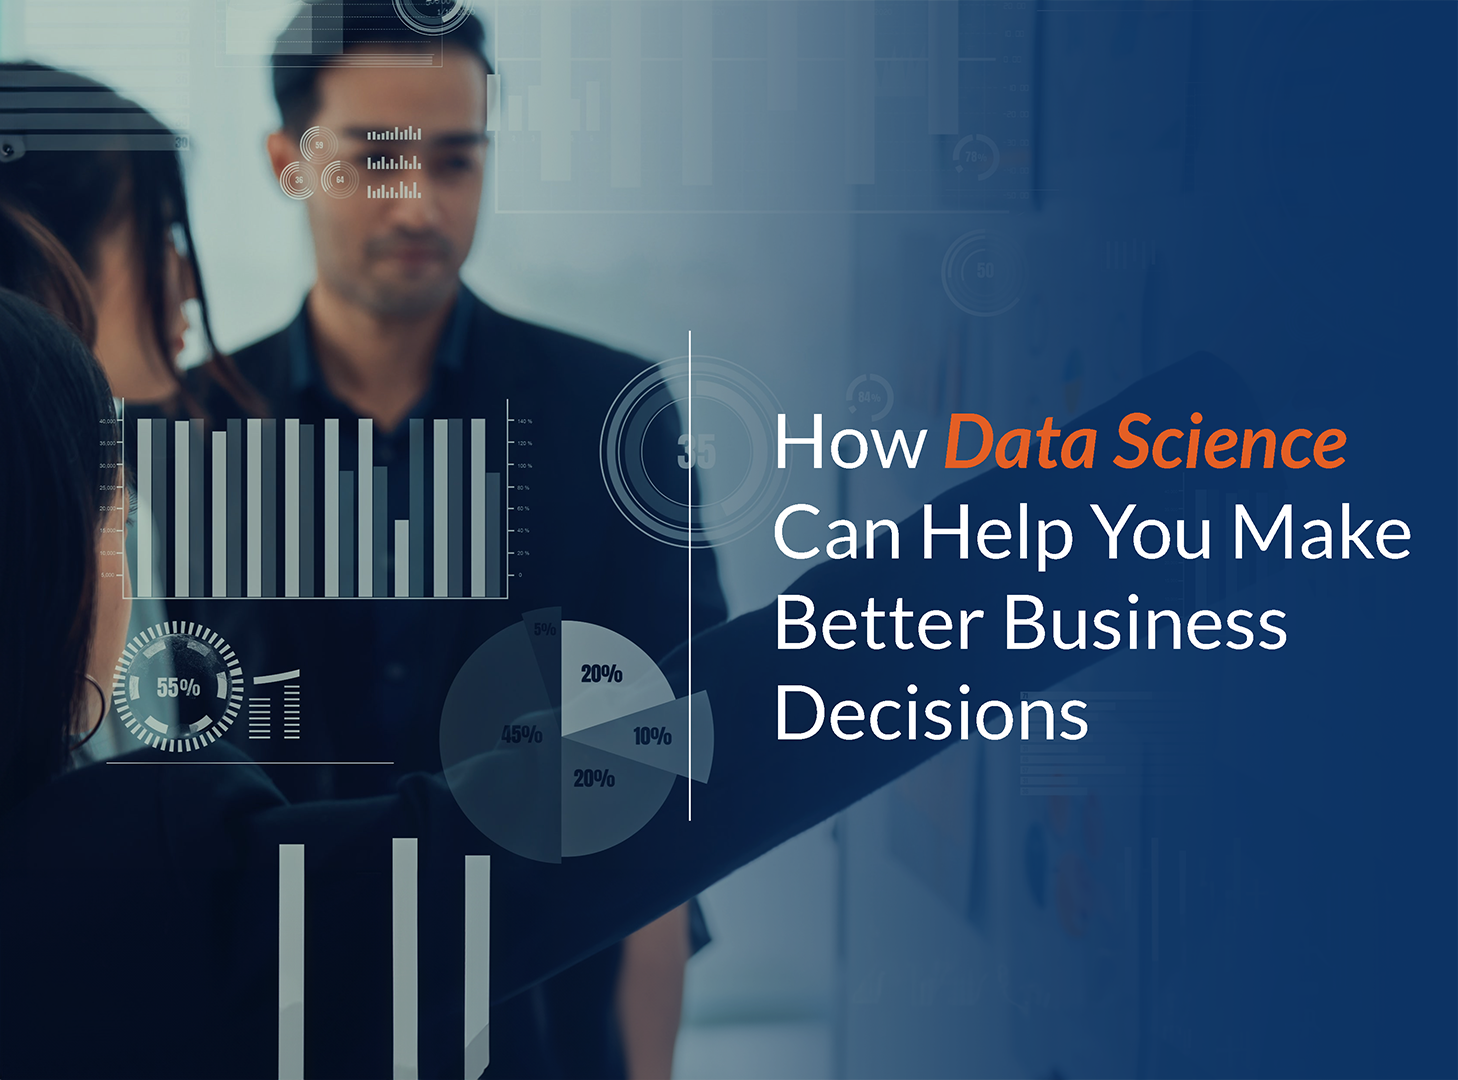 How Data Science Can Help You Make Better Business Decisions